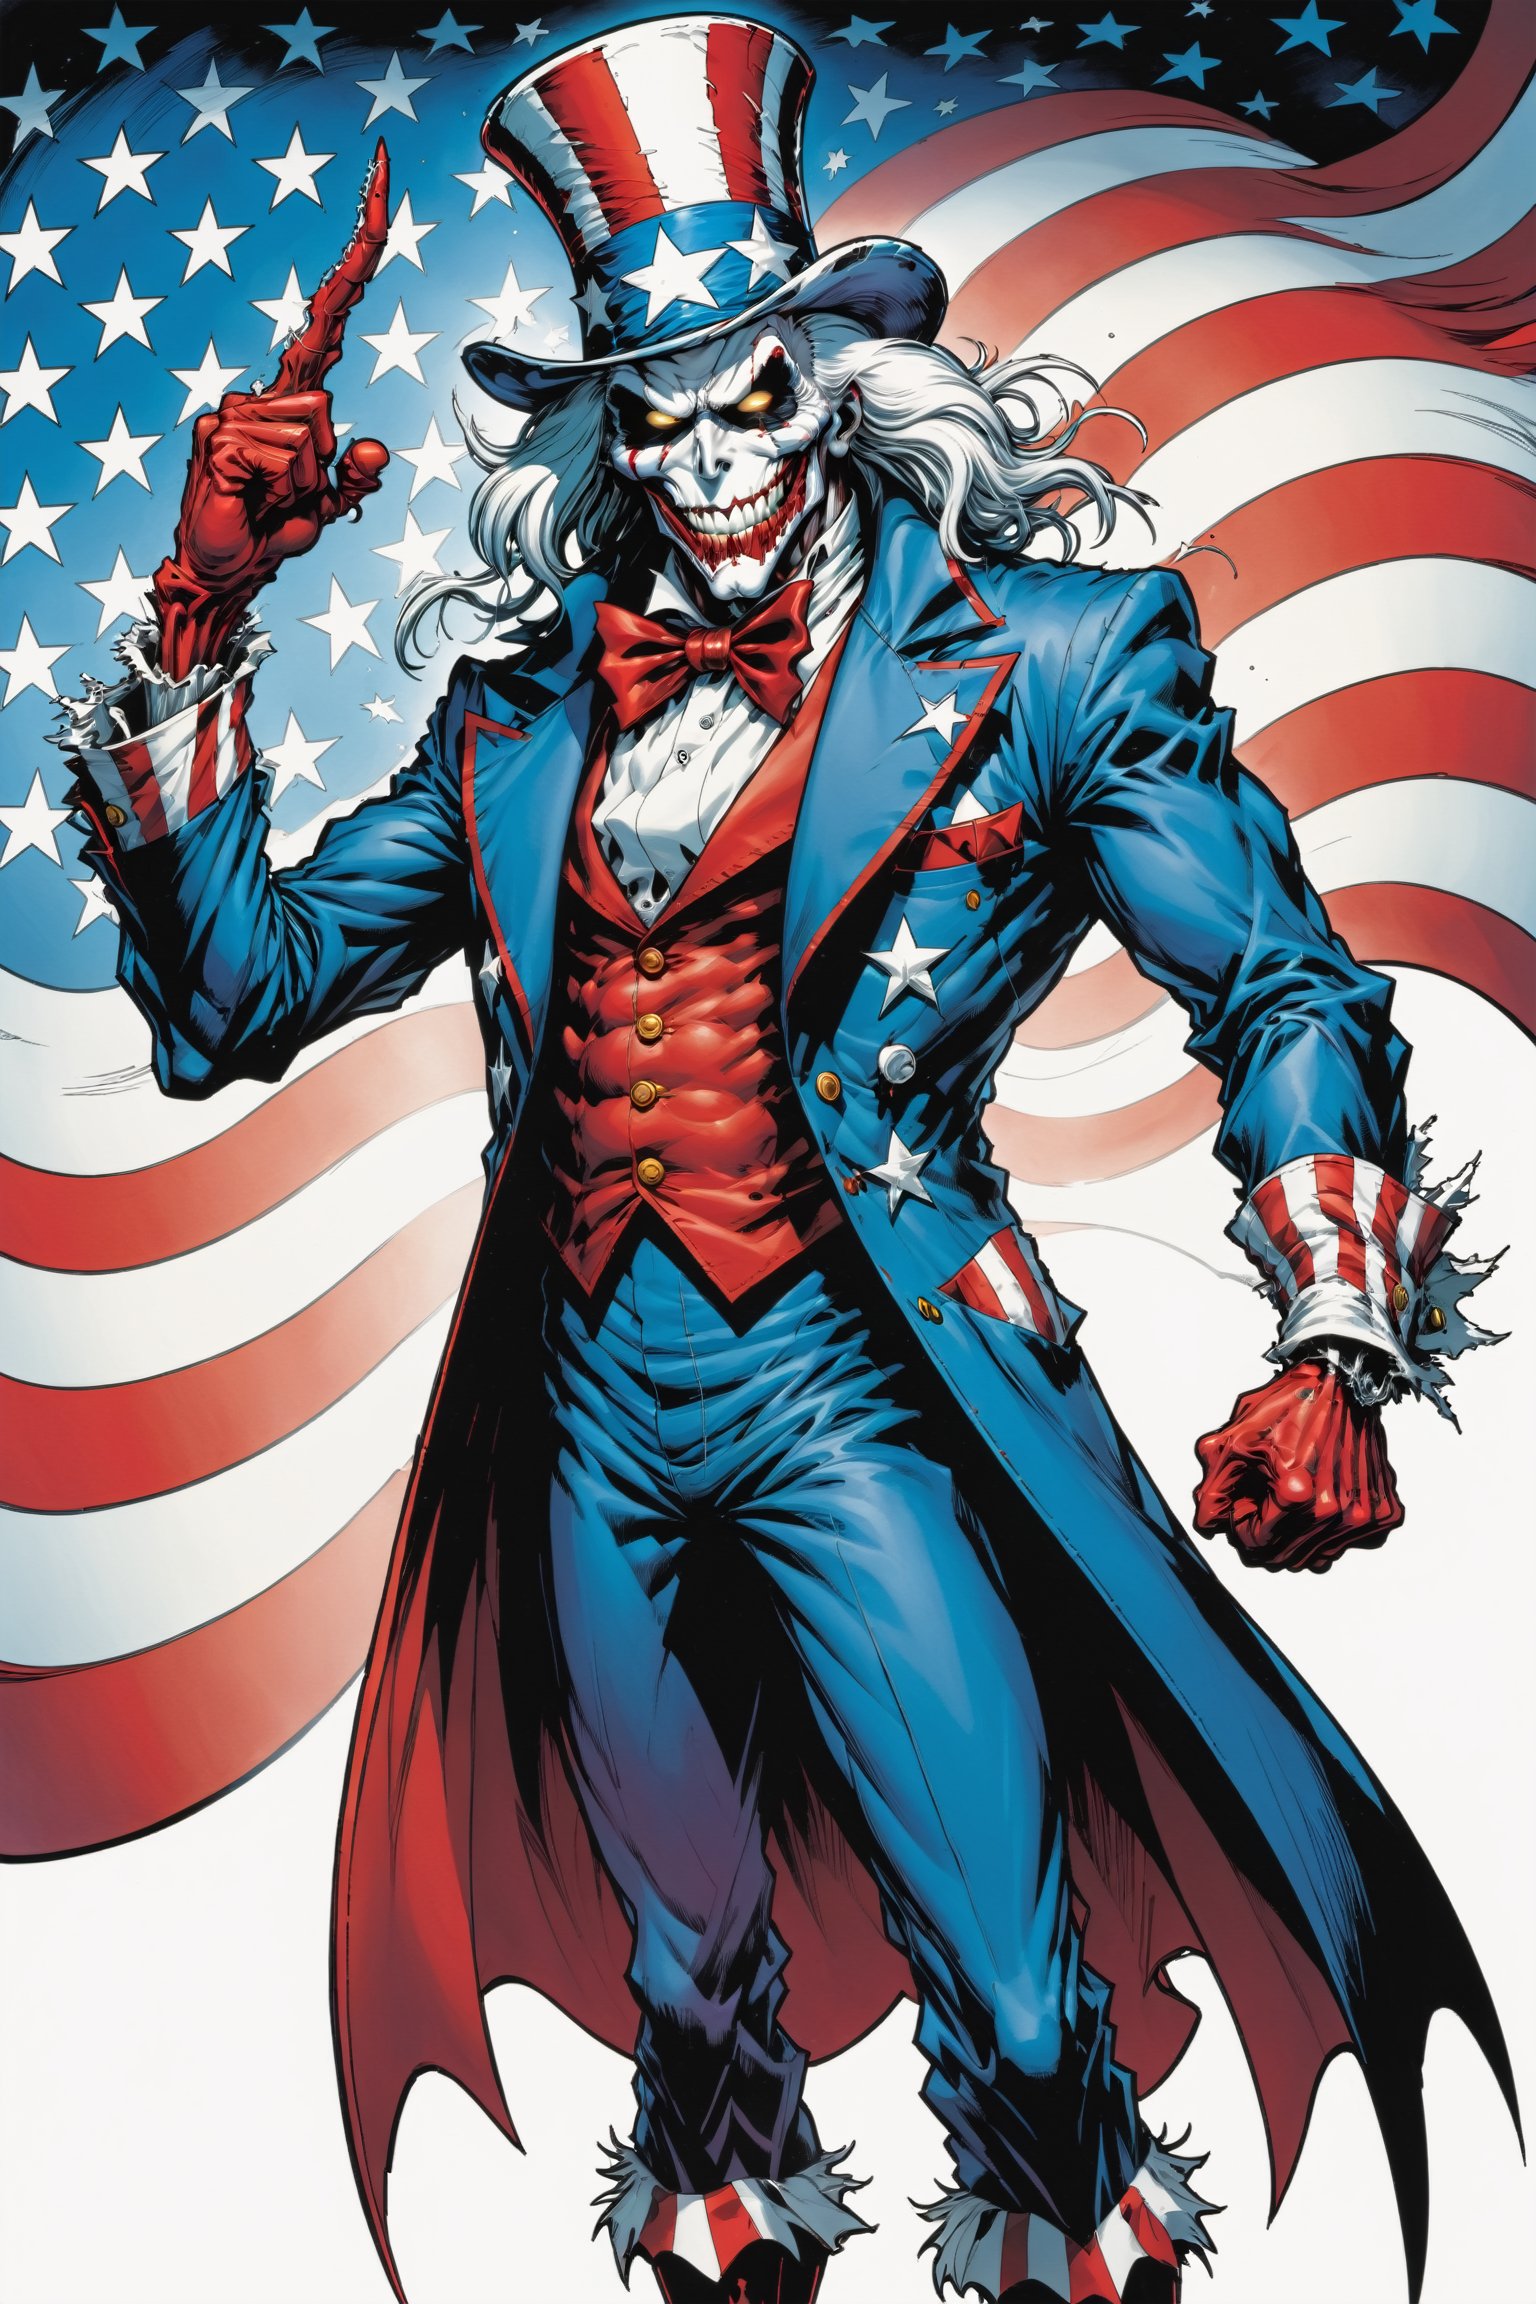 midshot, cel-shading style, centered image, ultra detailed illustration of the comic character ((Spawn Uncle Sam, by Todd McFarlane)), posing, Long white hair, Red white and blue, suit with a skull emblem,  ((Full Body)), (tetradic colors), inkpunk, ink lines, strong outlines, art by MSchiffer, bold traces, unframed, high contrast, cel-shaded, vector, 4k resolution, best quality, (chromatic aberration:1.8)